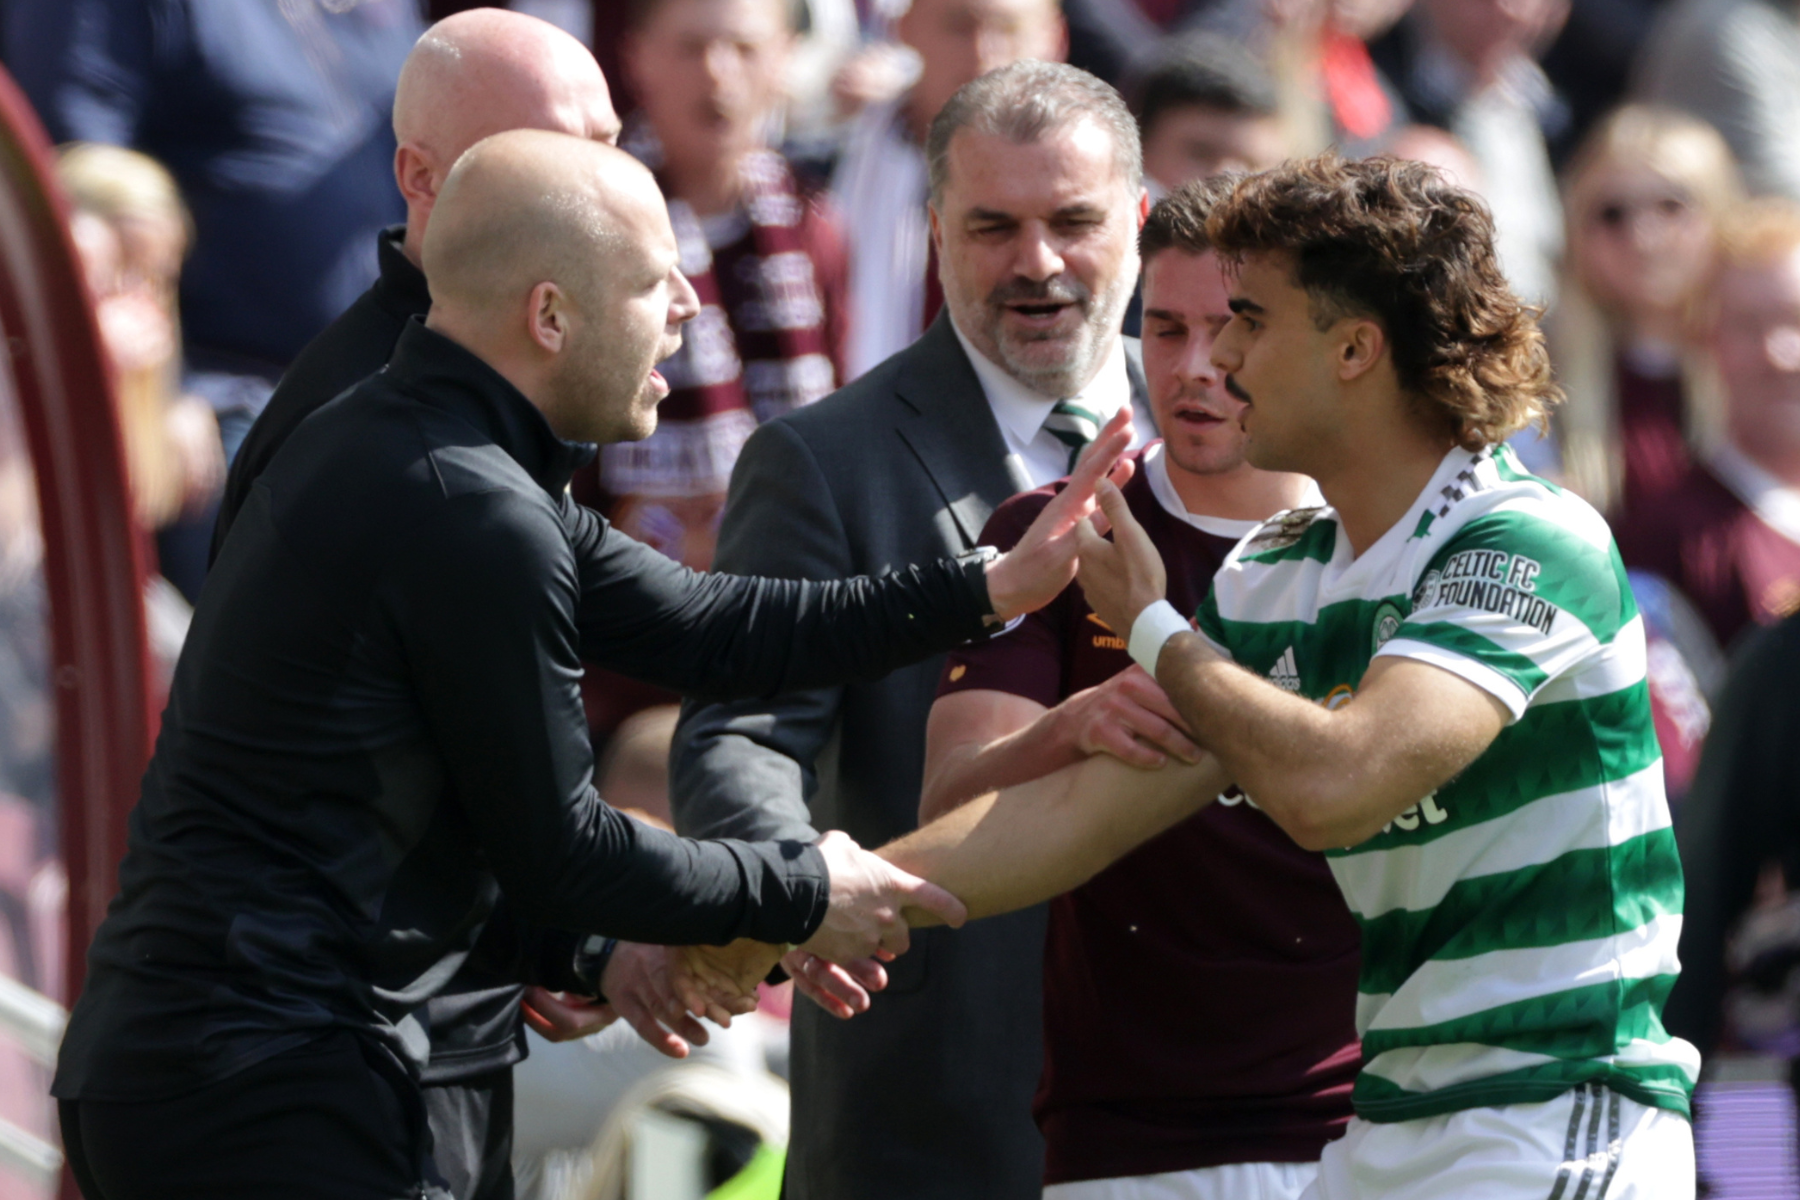 Hearts manager reveals 'disbelief' at red card in Celtic defeat